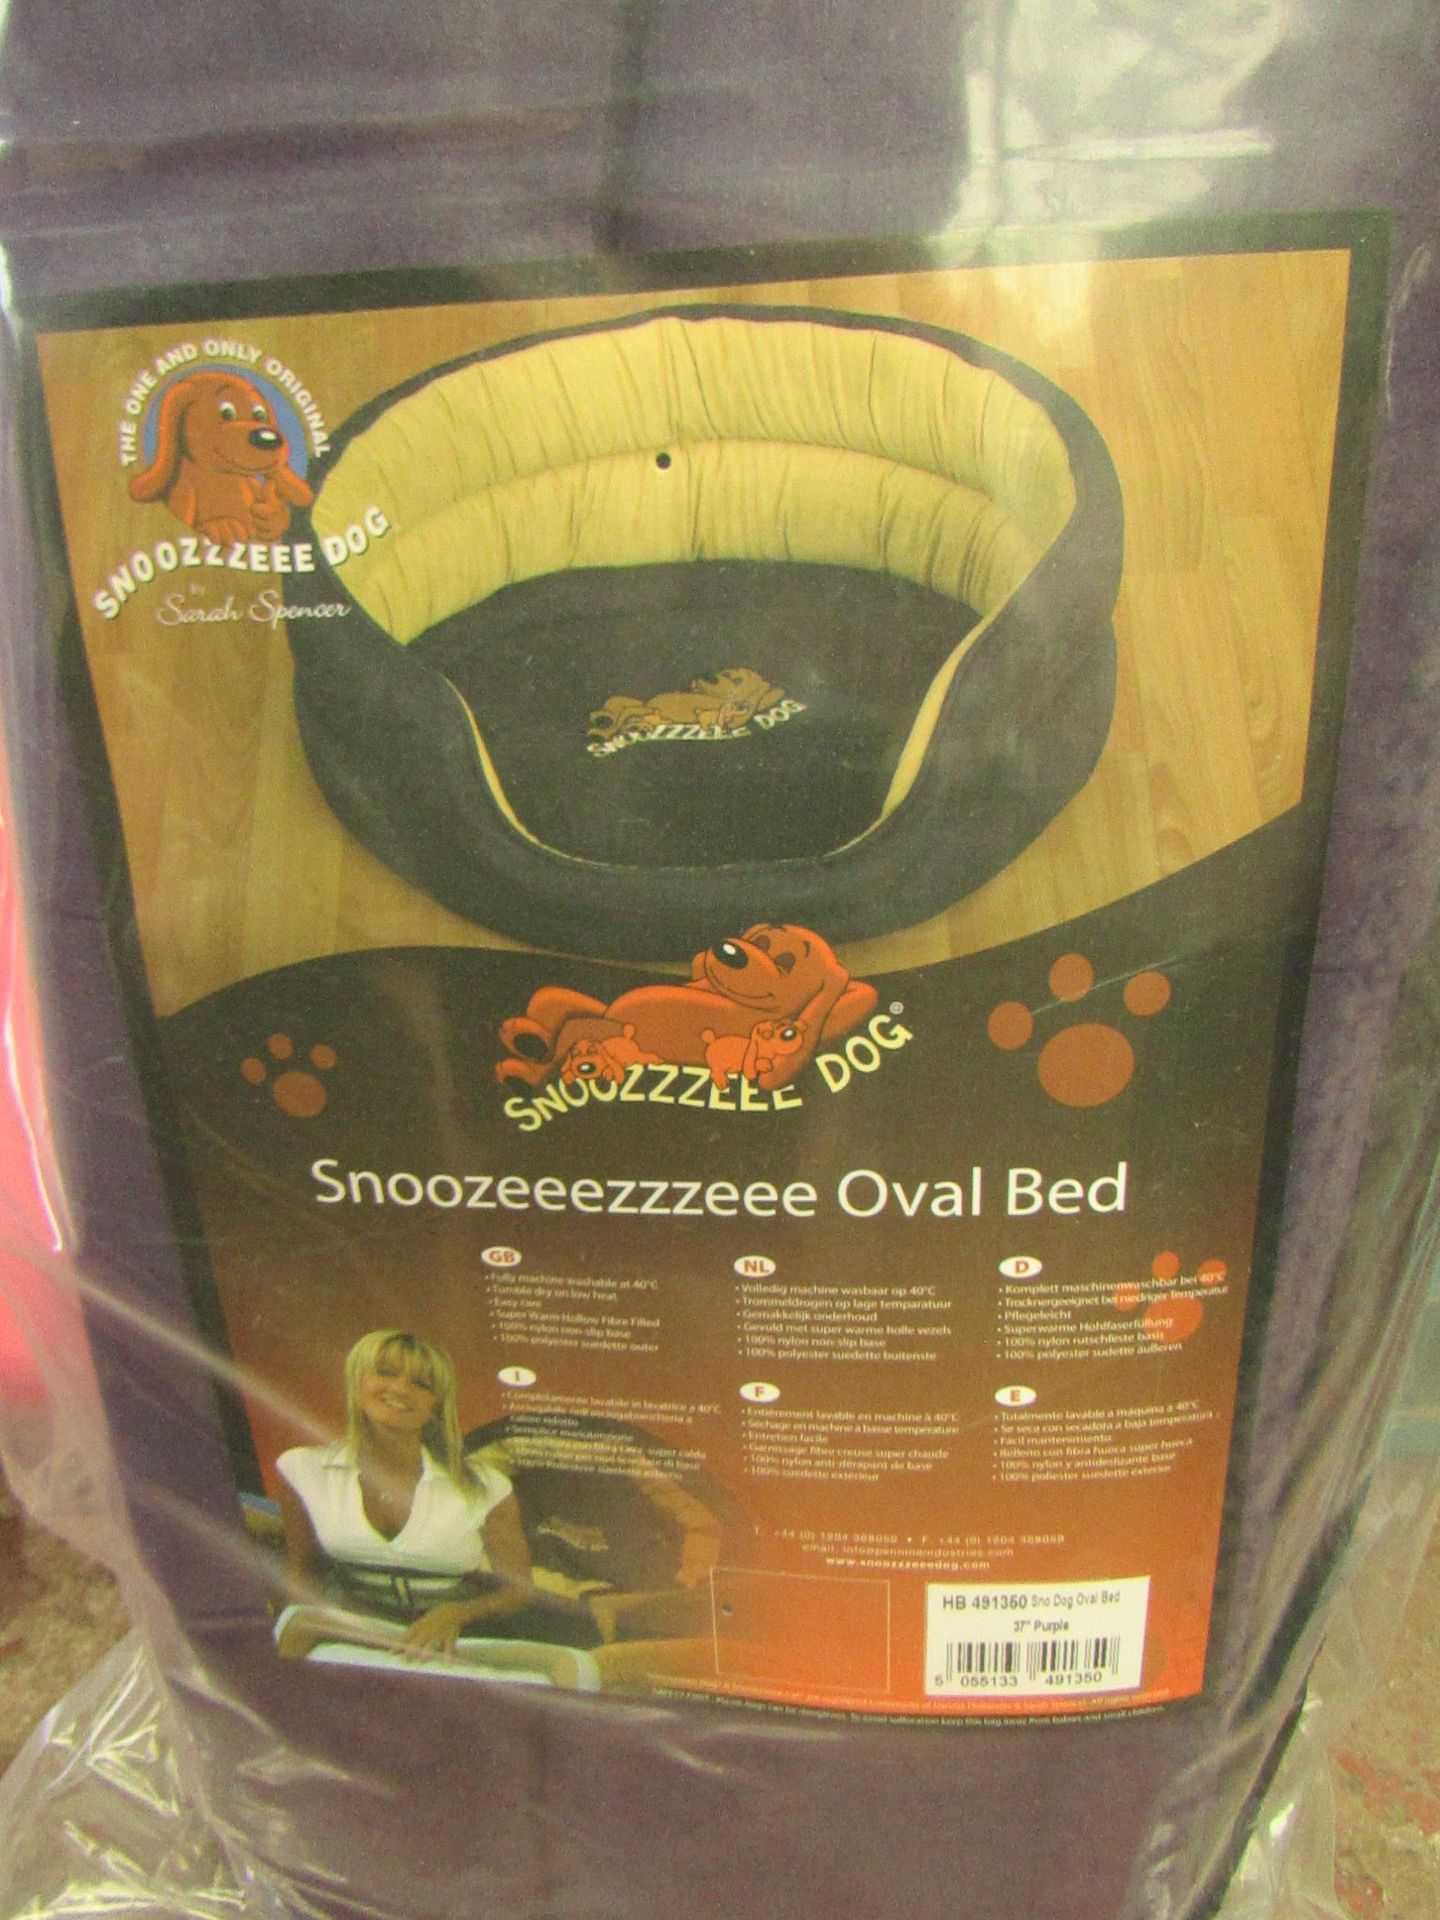 1x Snoozzzeee Dog - Purple Oval Dog Bed (37") - All New & Packaged.